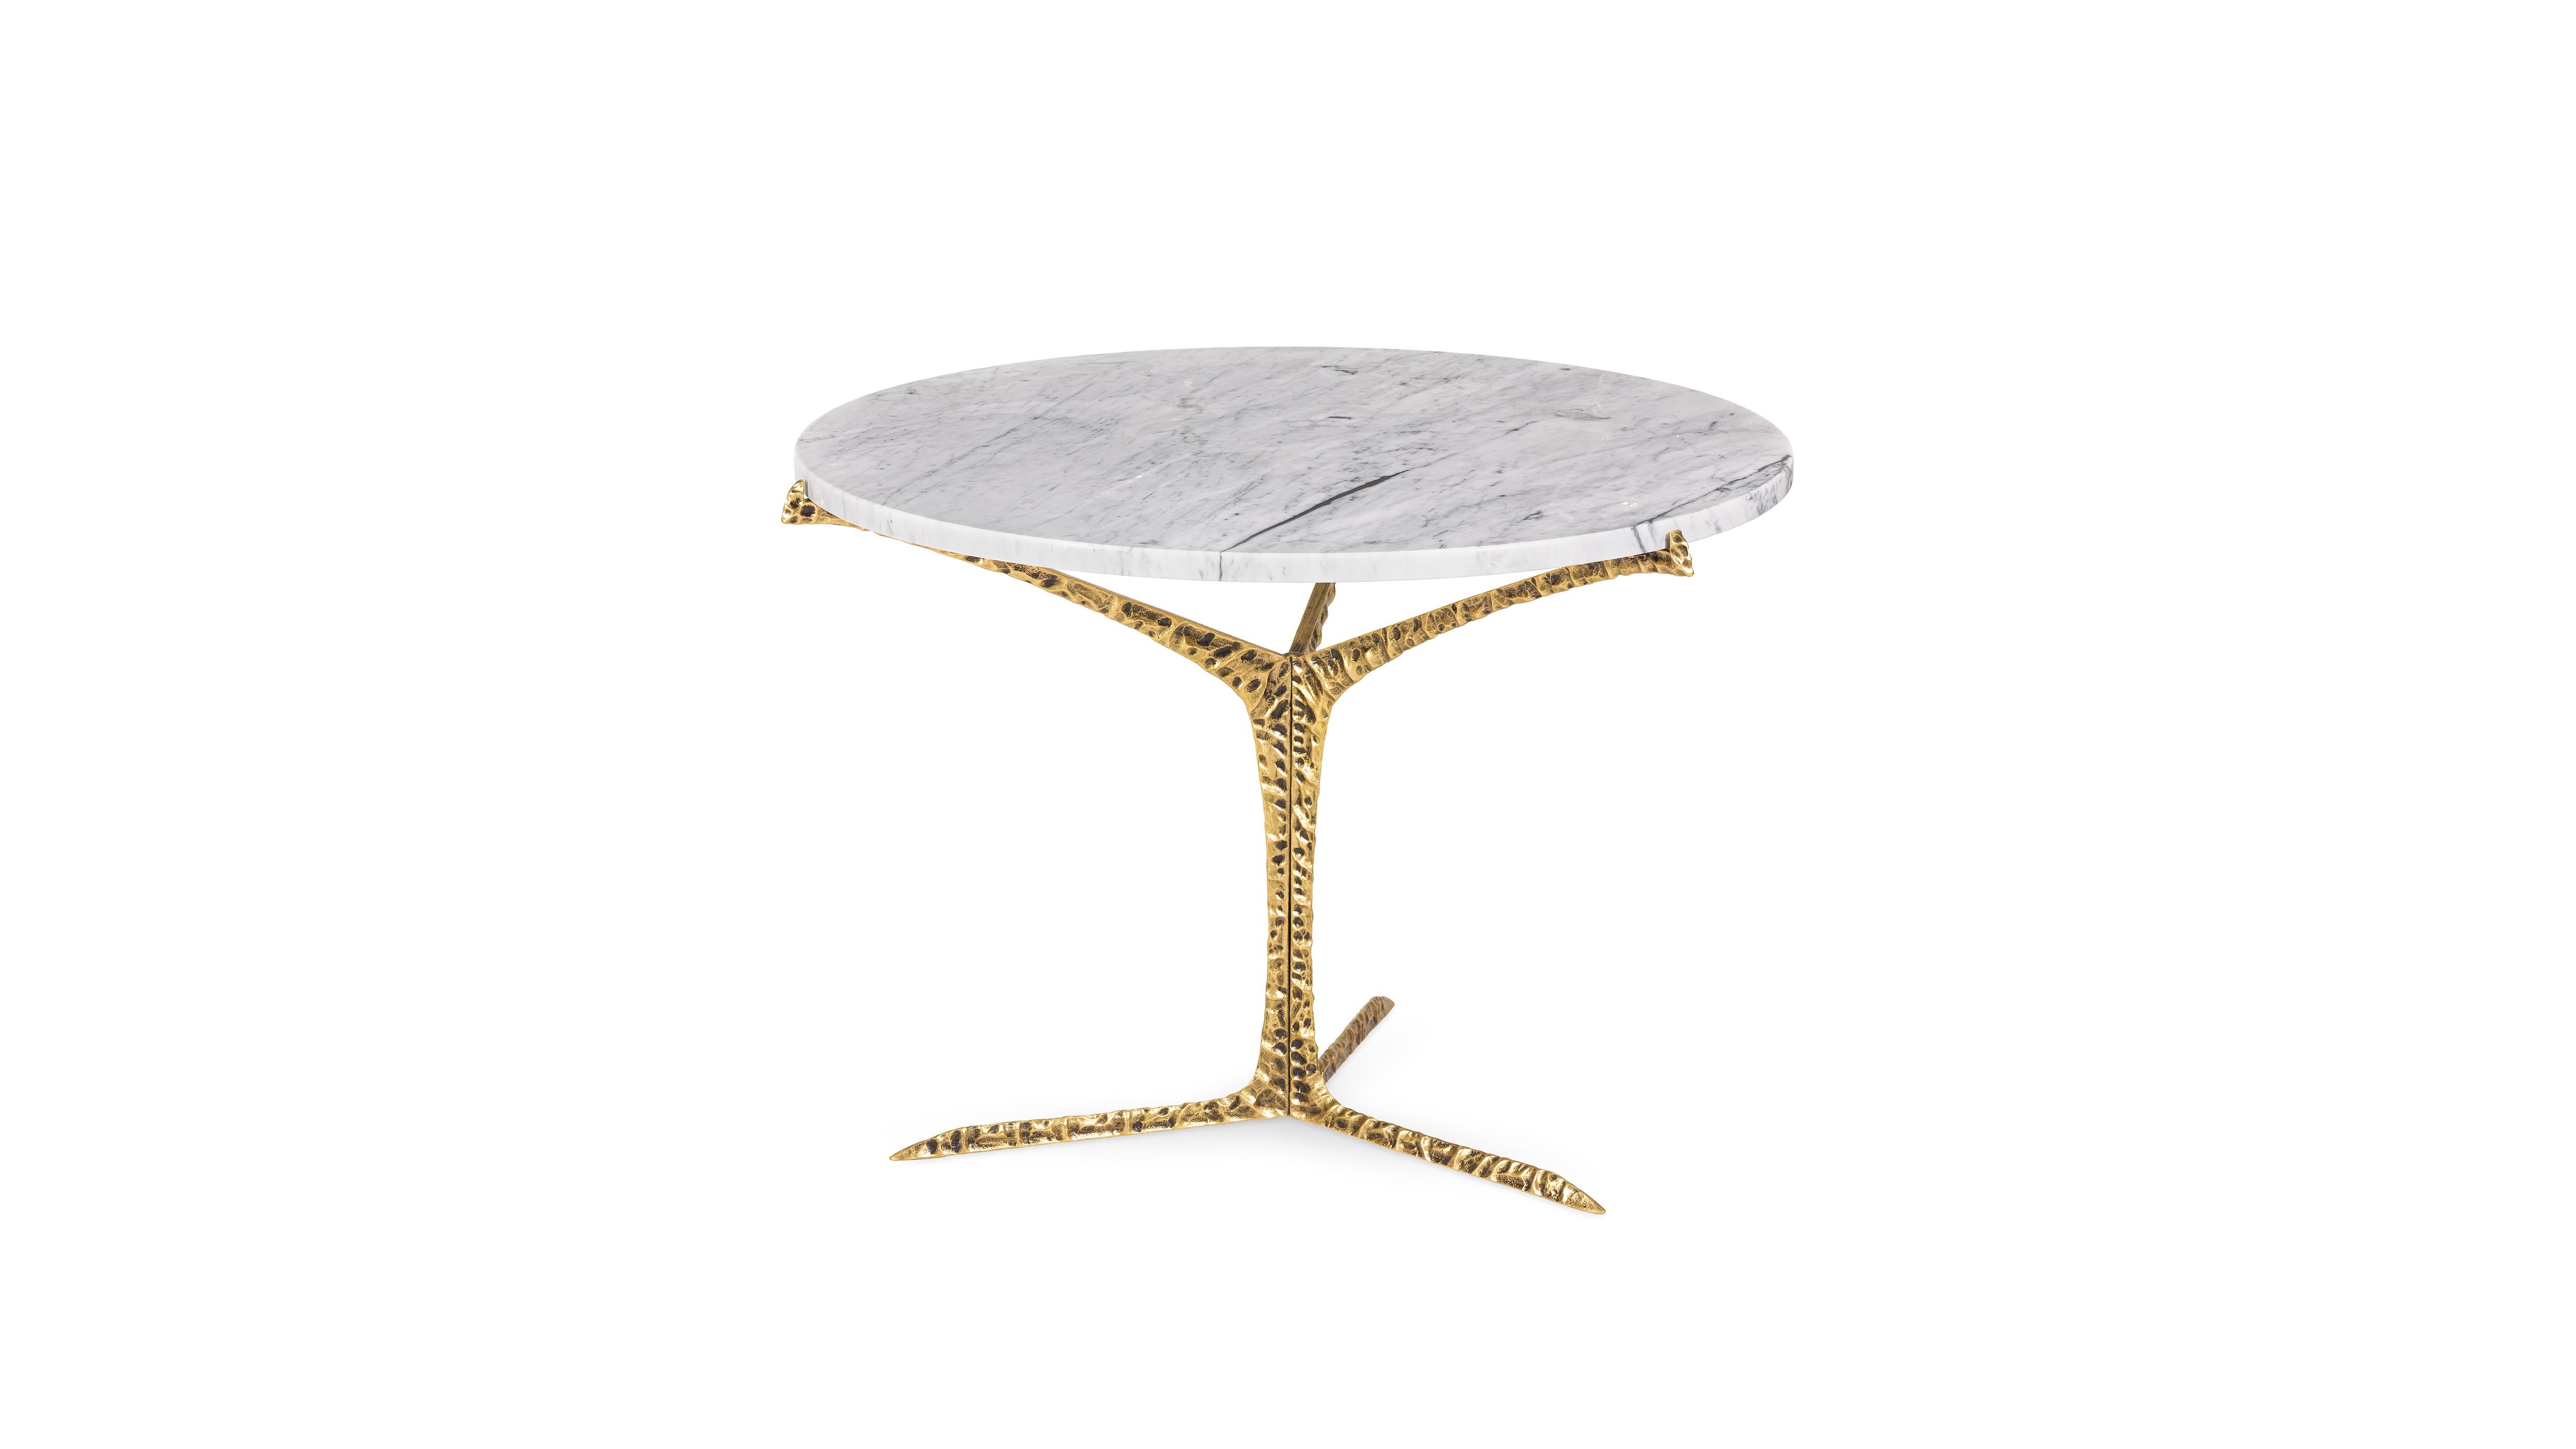 Medium Alentejo Carrara Marble Coffee Table by InsidherLand
Dimensions: D 74 x W 74 x H 49 cm.
Materials: Carrara marble, cast brass with patinated effect.
25 kg.
Other materials available.

Alentejo tables are a glimpse over the South of Portugal